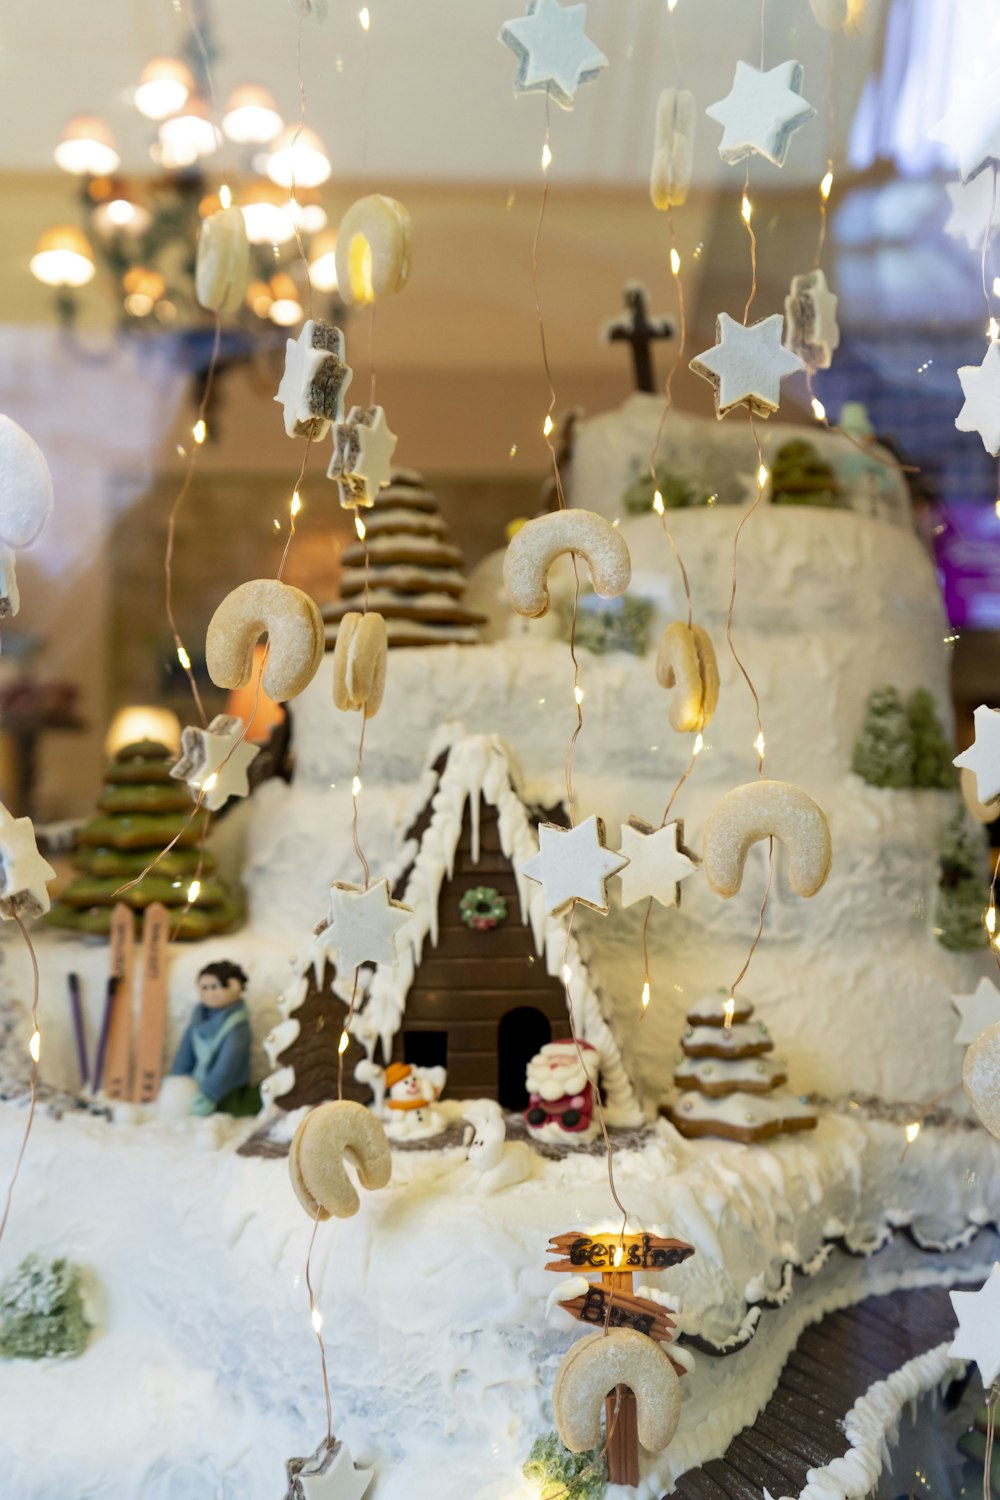 a christmas display in a store window